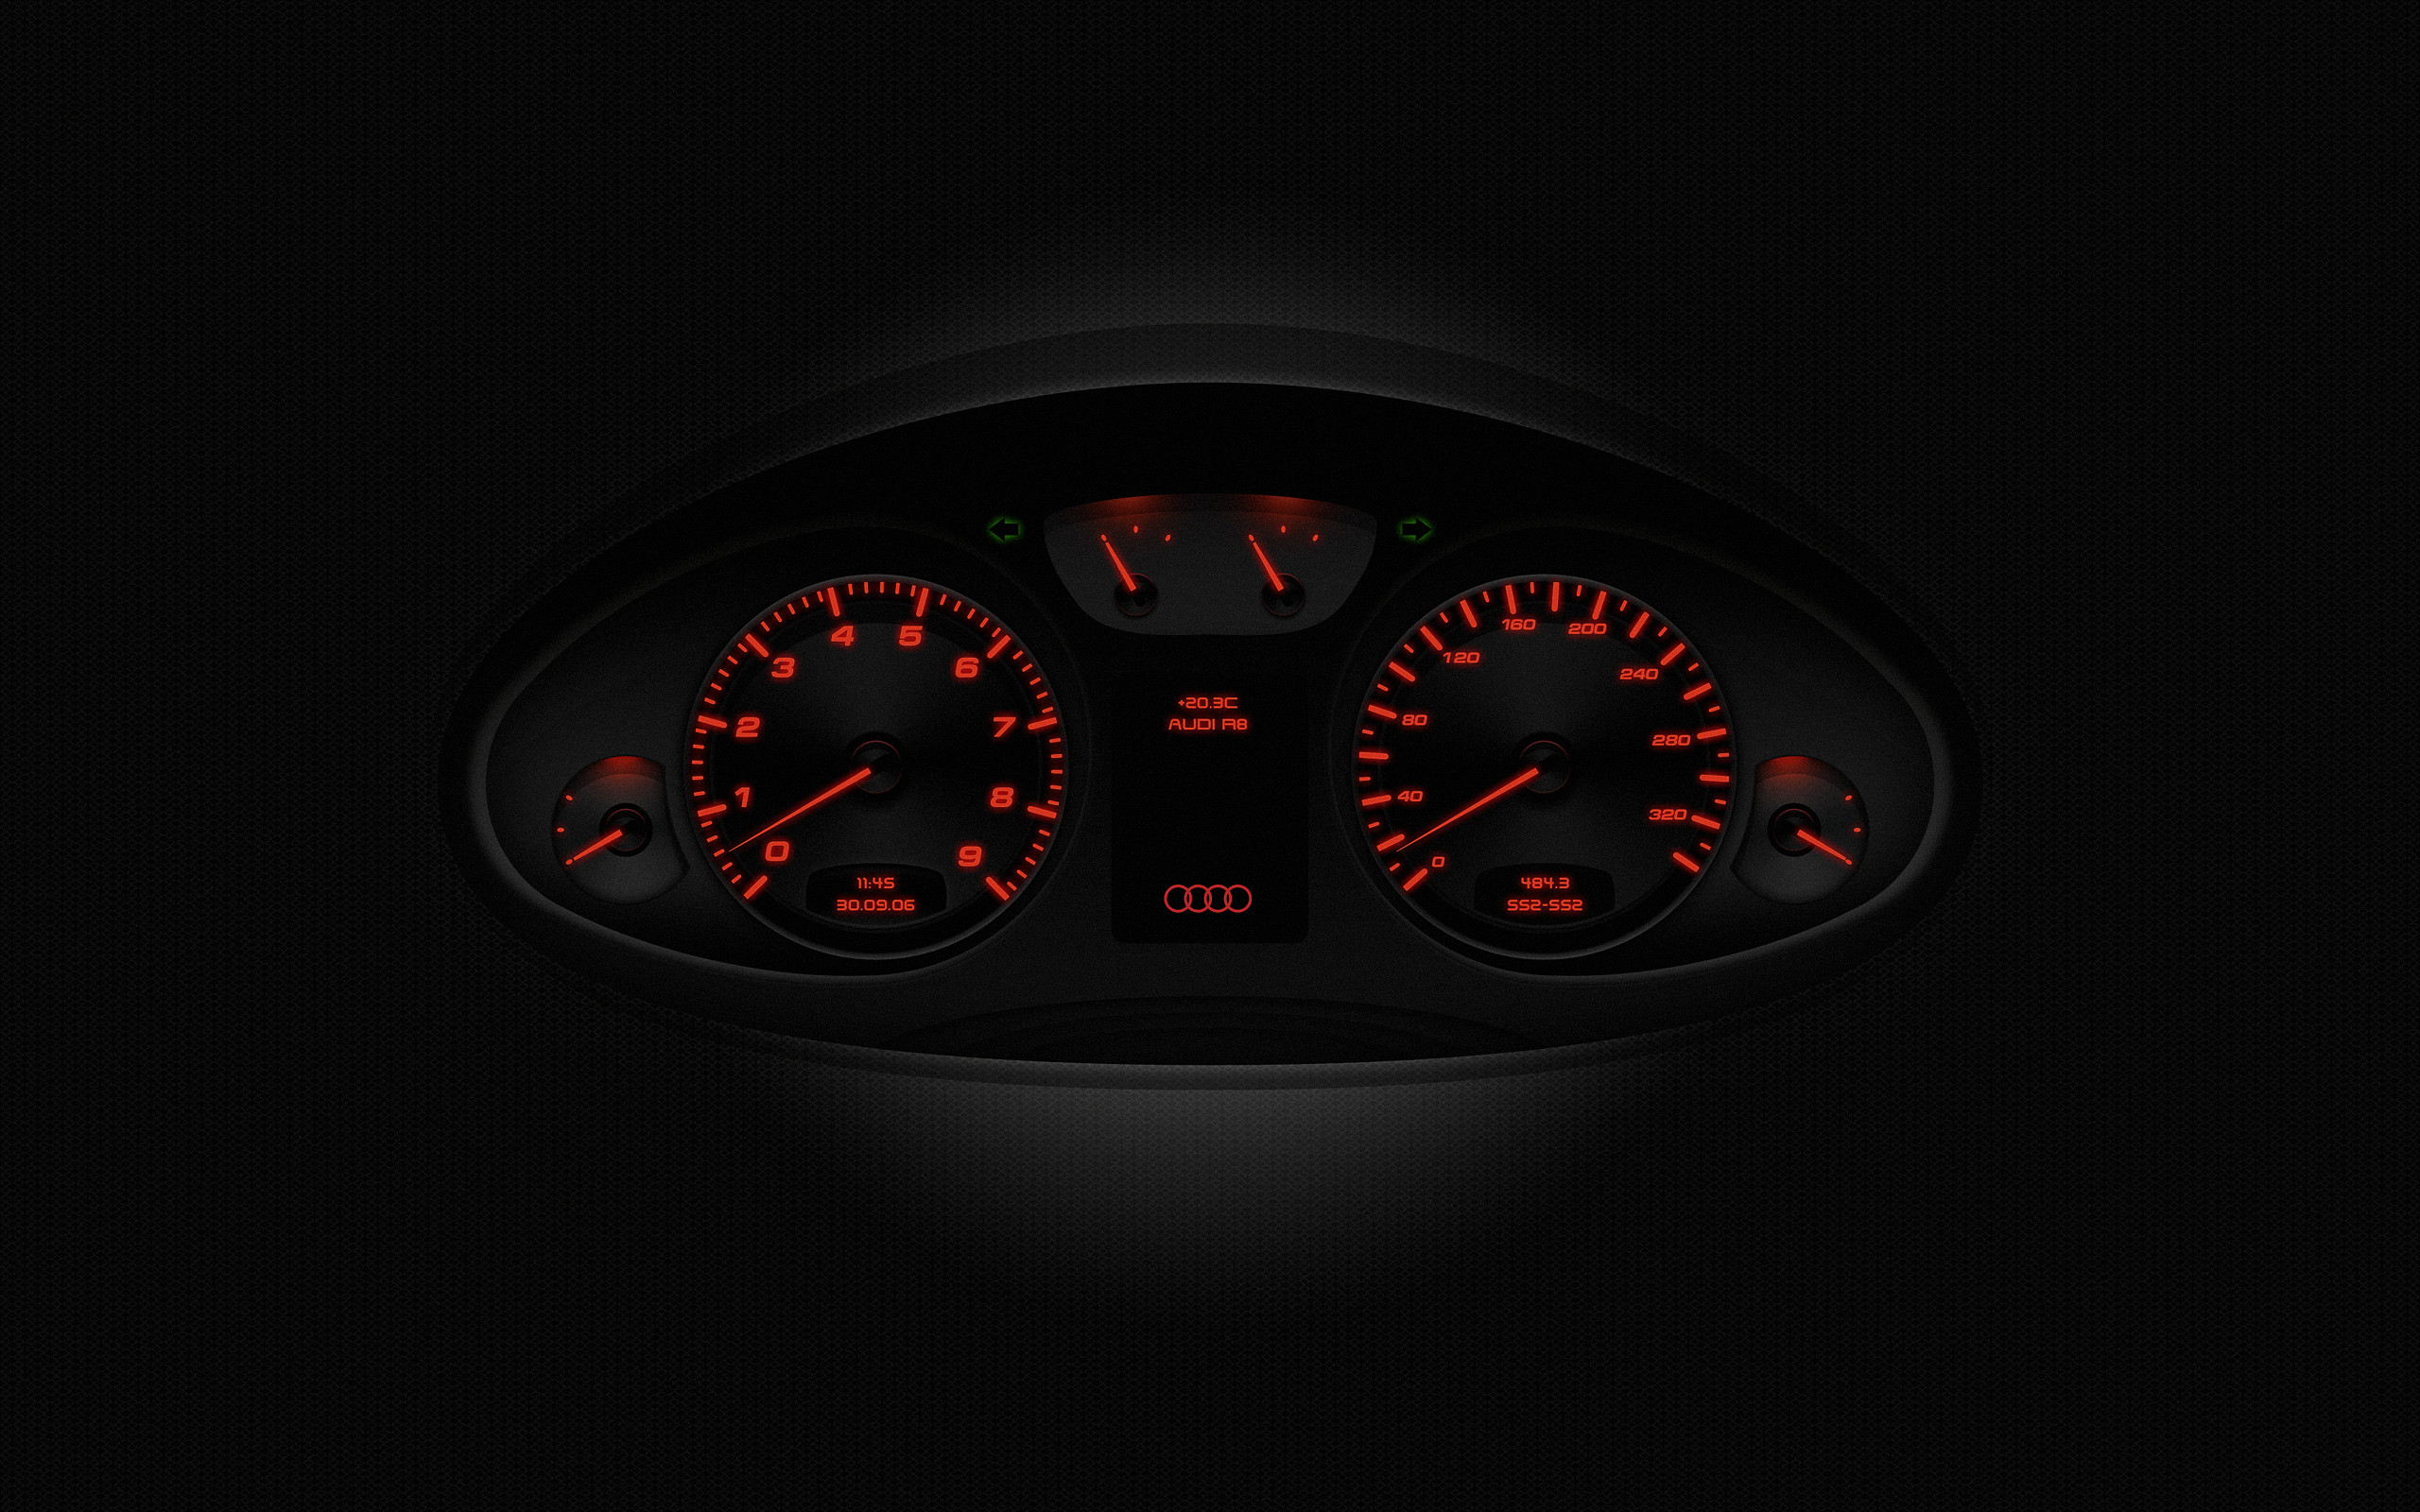 2560x1600 Related Wallpapers from Scion tC Wallpaper. Audi Gauges Wallpaper